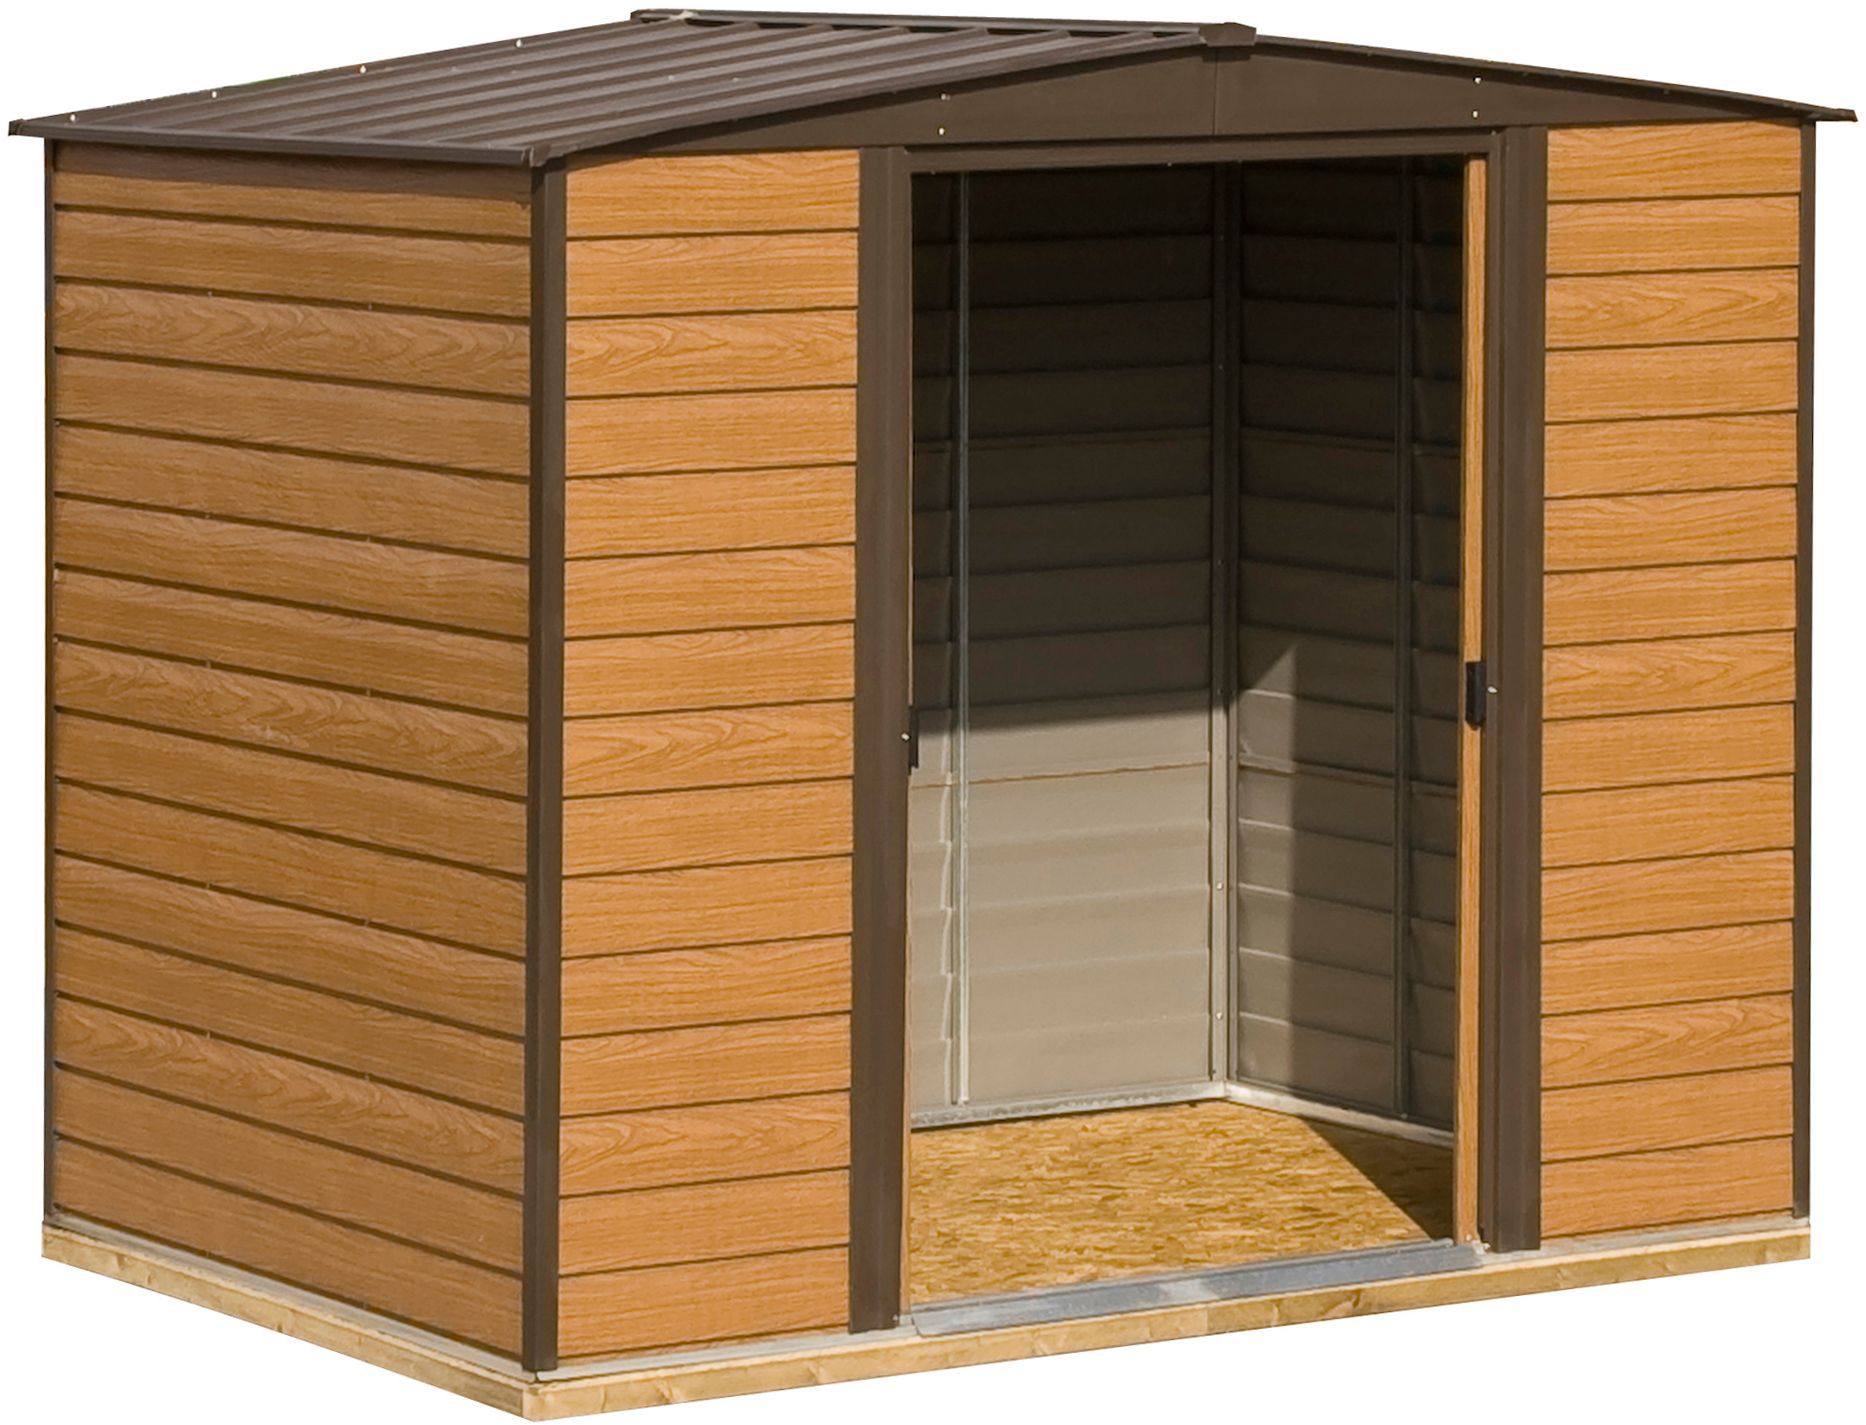 Arrow Woodvale 8x6 ft Apex Coffee Metal 2 door Shed with floor - Assembly service included